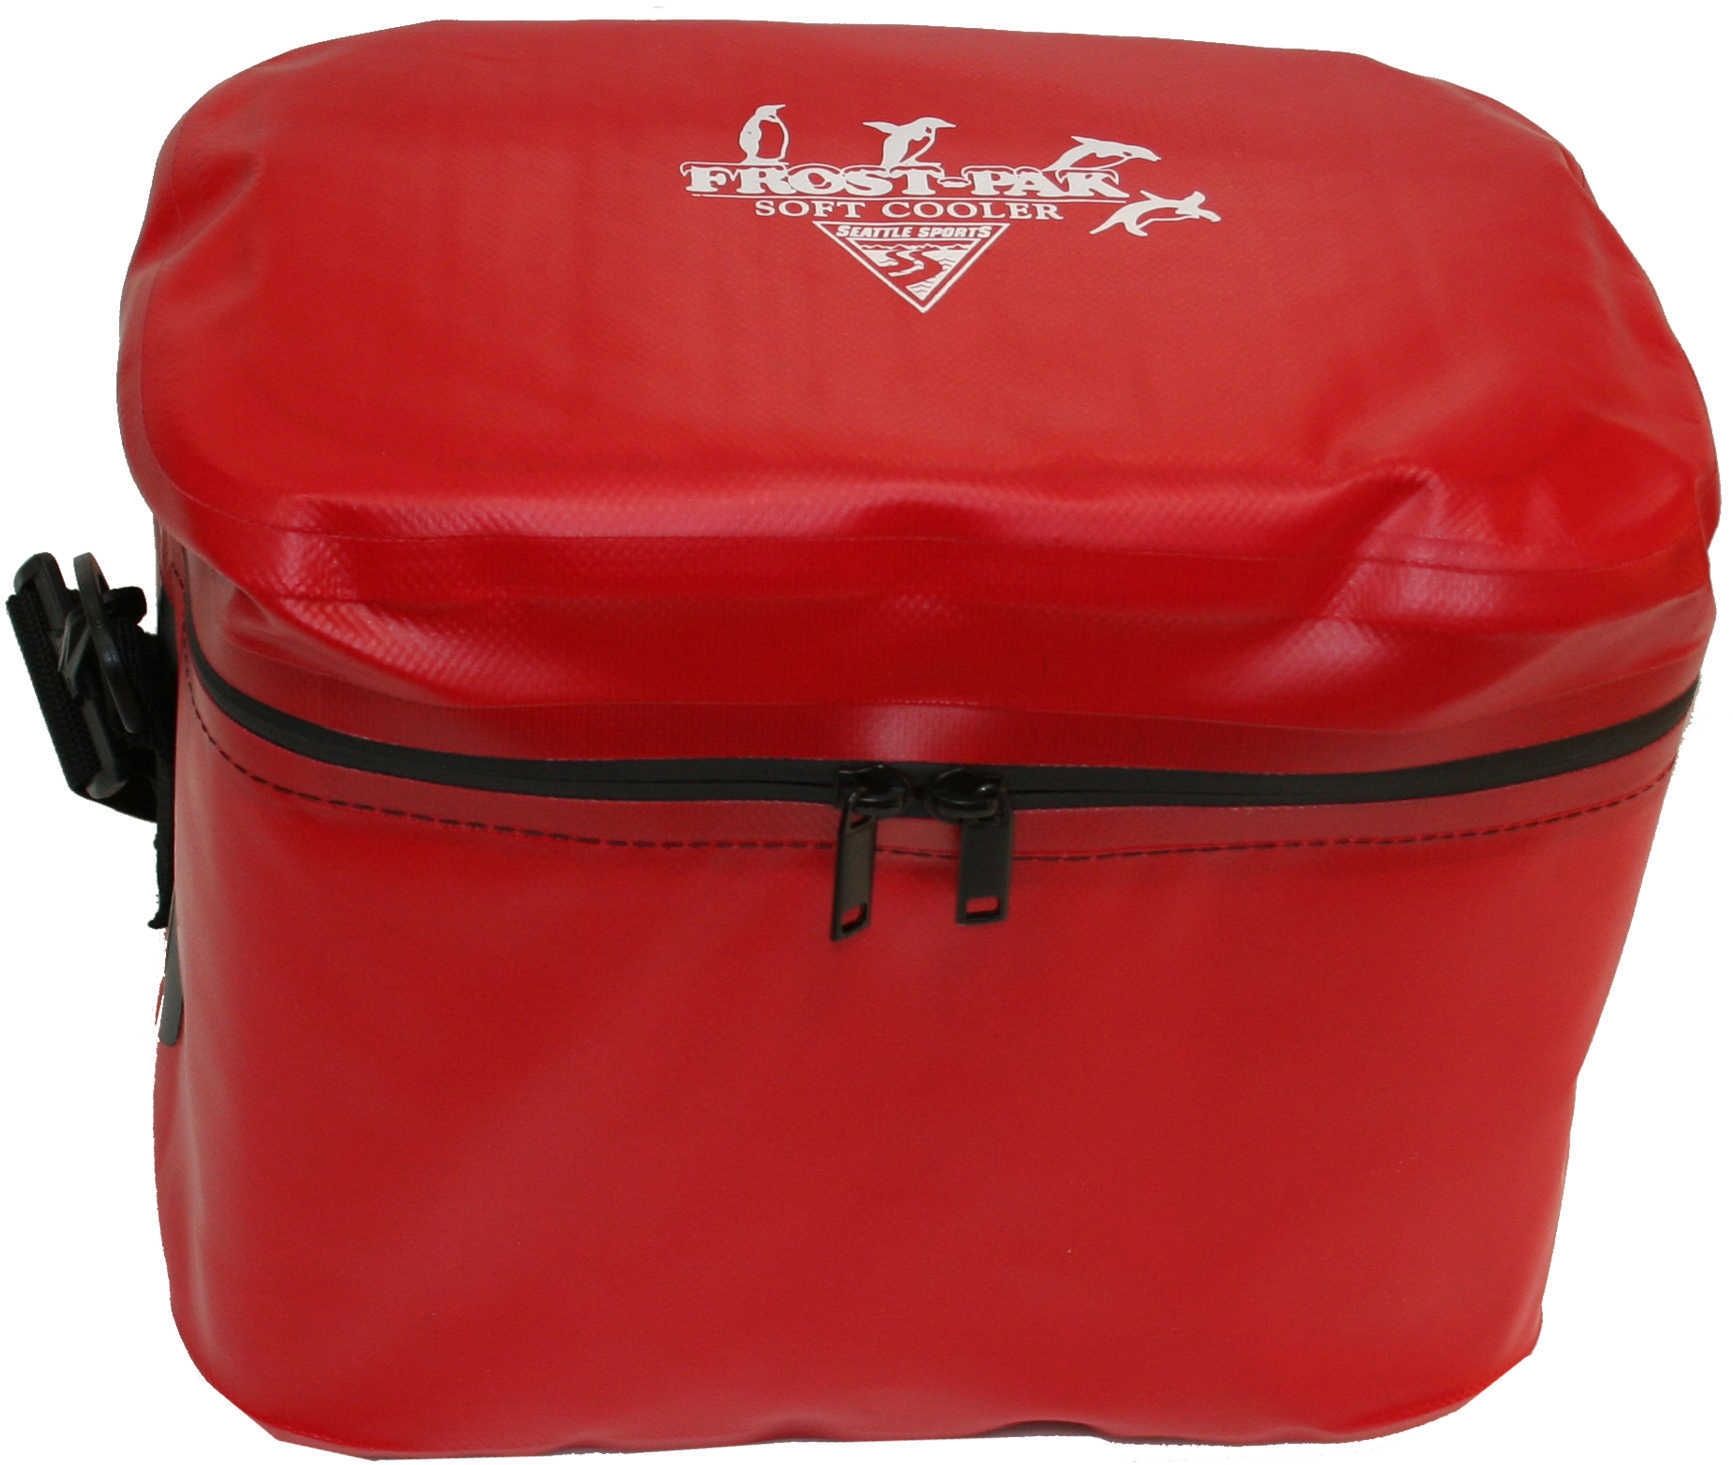 Seattle Sports Frost Pak Soft Cooler 19 Qt Red 021801